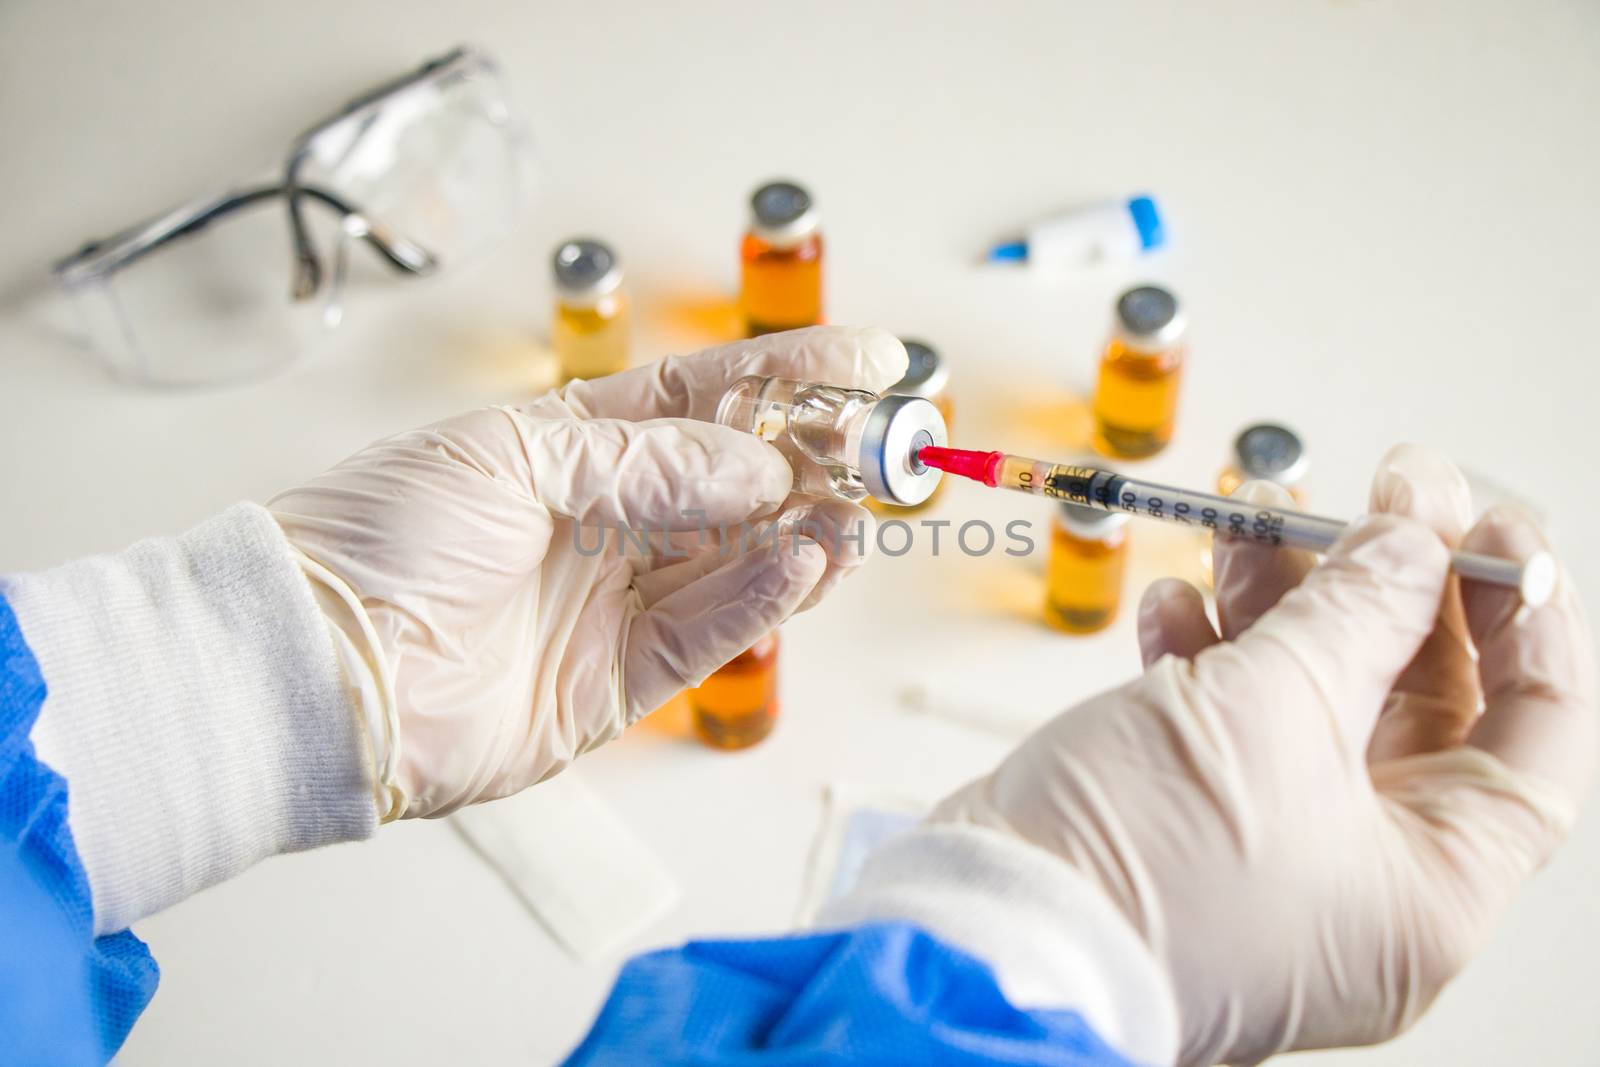 Corona virus and Covid - 19 new vaccine in ampules and bottles, needle and doctors hands in glove. by Taidundua